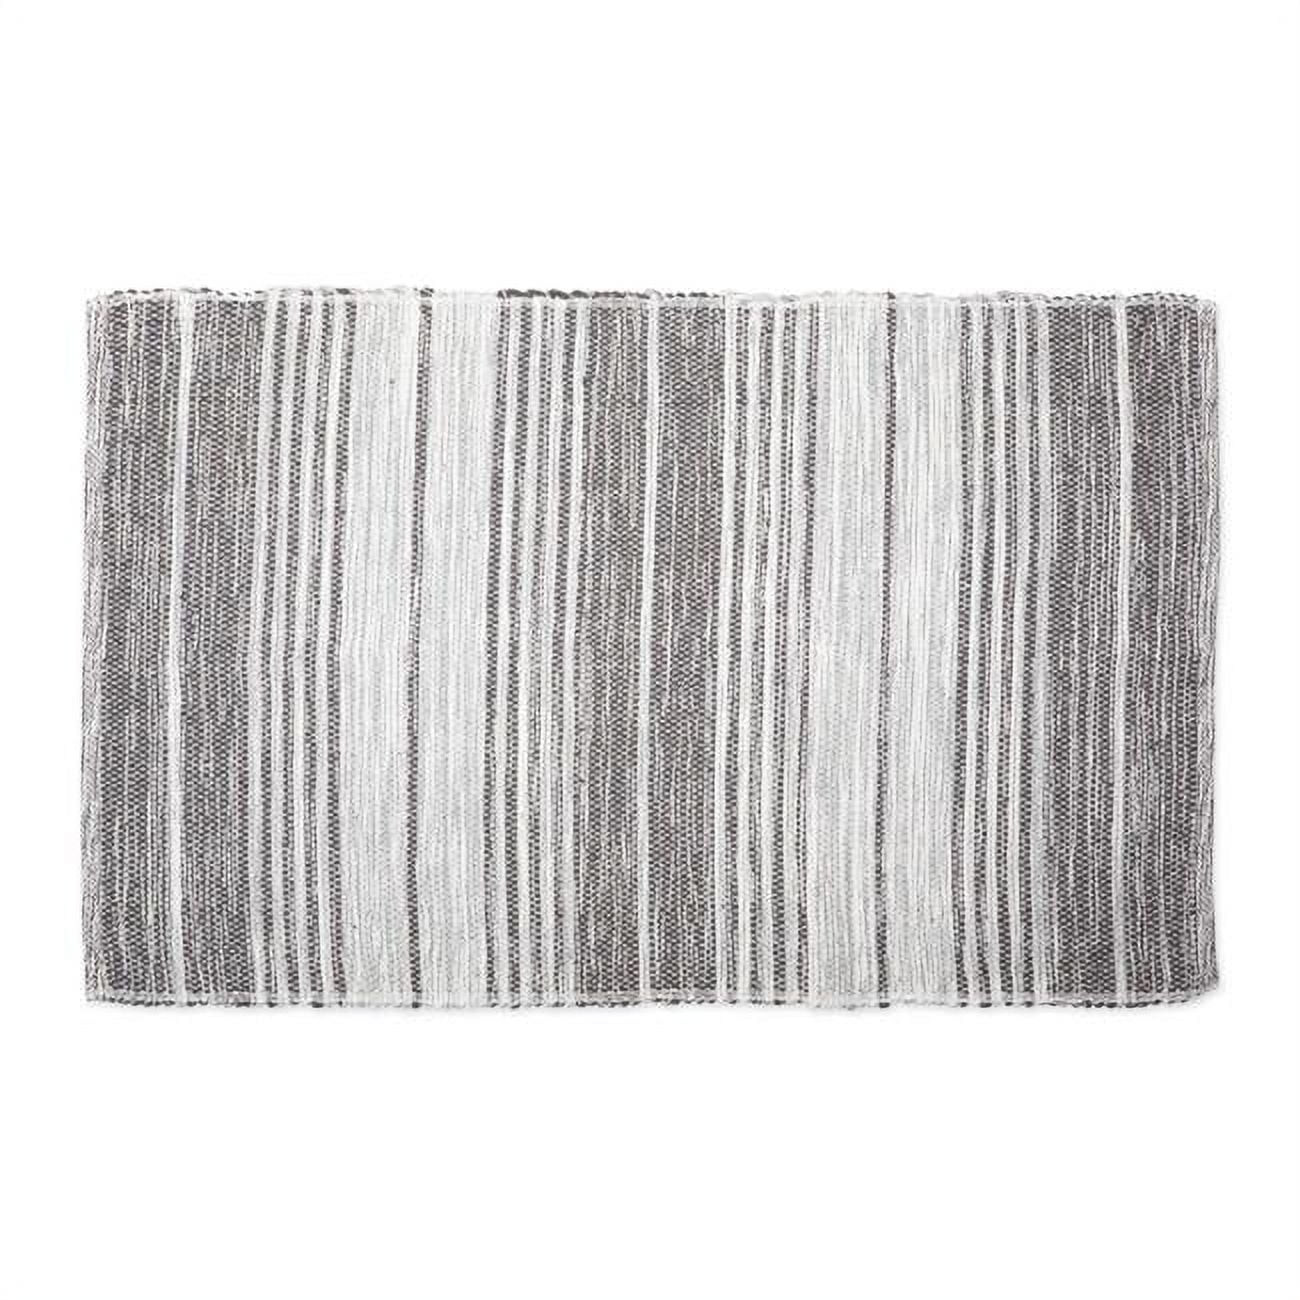 Design Imports Camz11090 Variegated Gray Recycled Yarn Rug, 2 X 3 Ft.